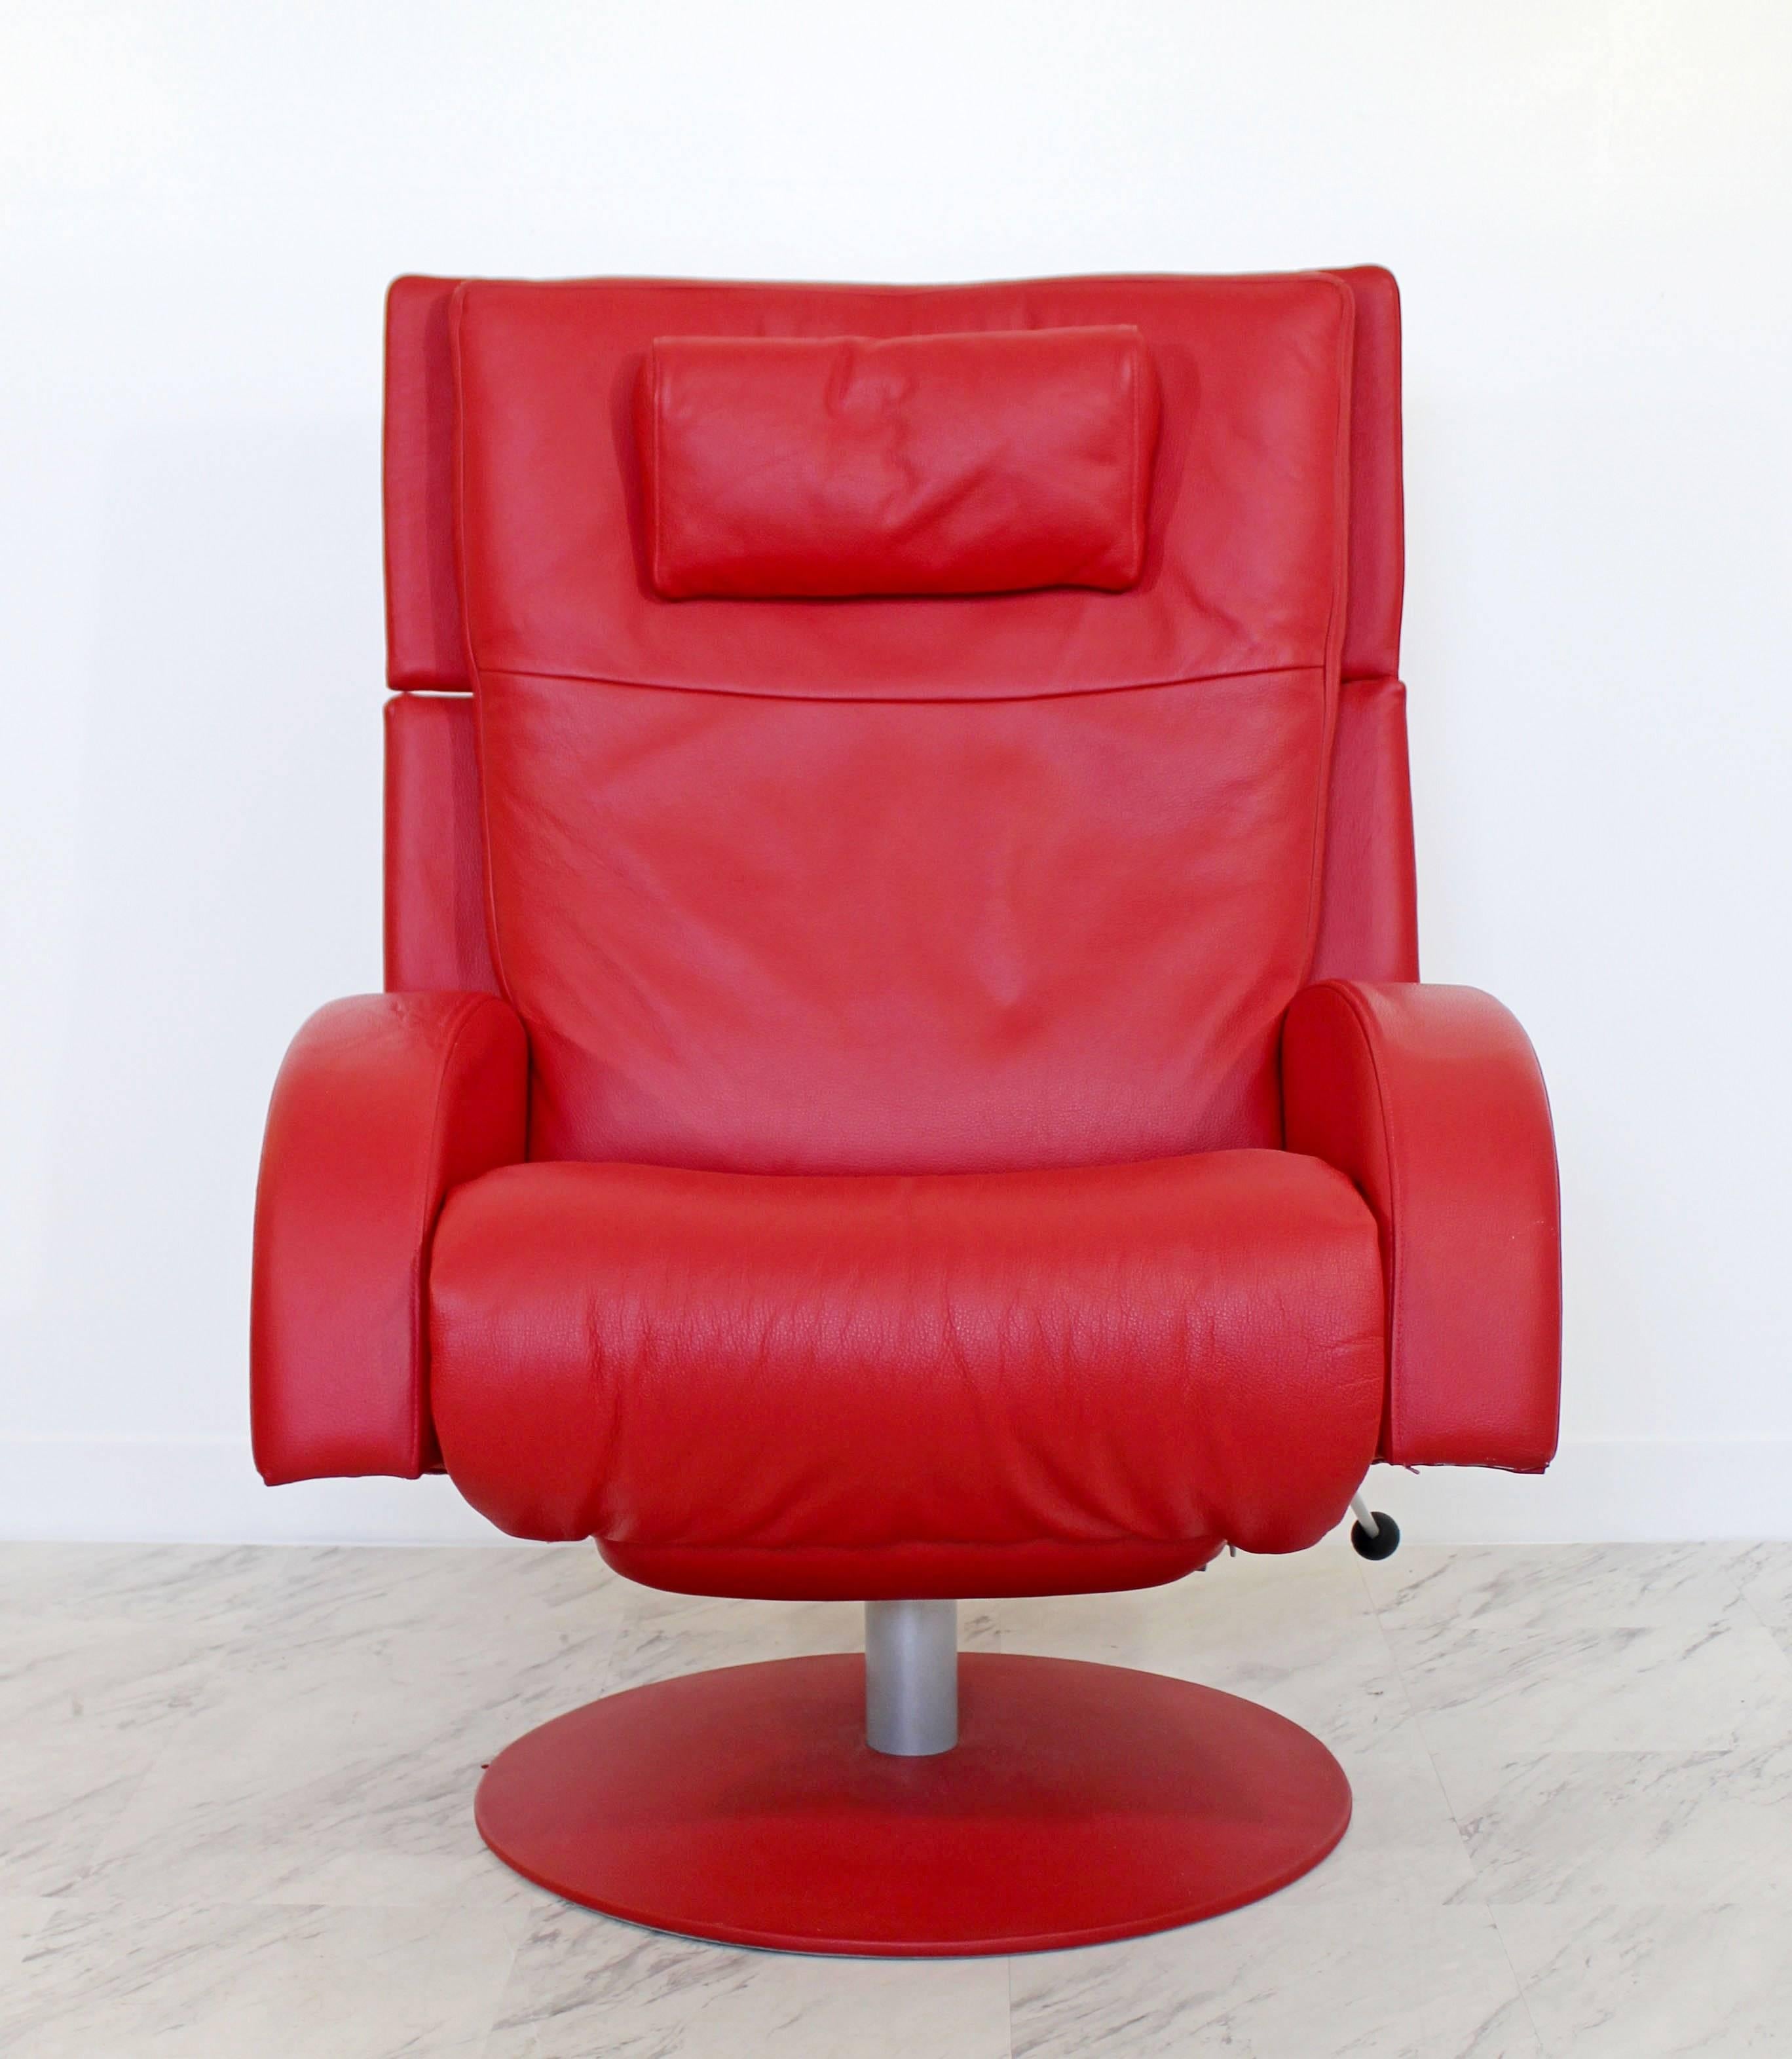 Brazilian Mid-Century Modern Lafer Pair Red Leather Reclining Lounge Chairs 1970s Brazil